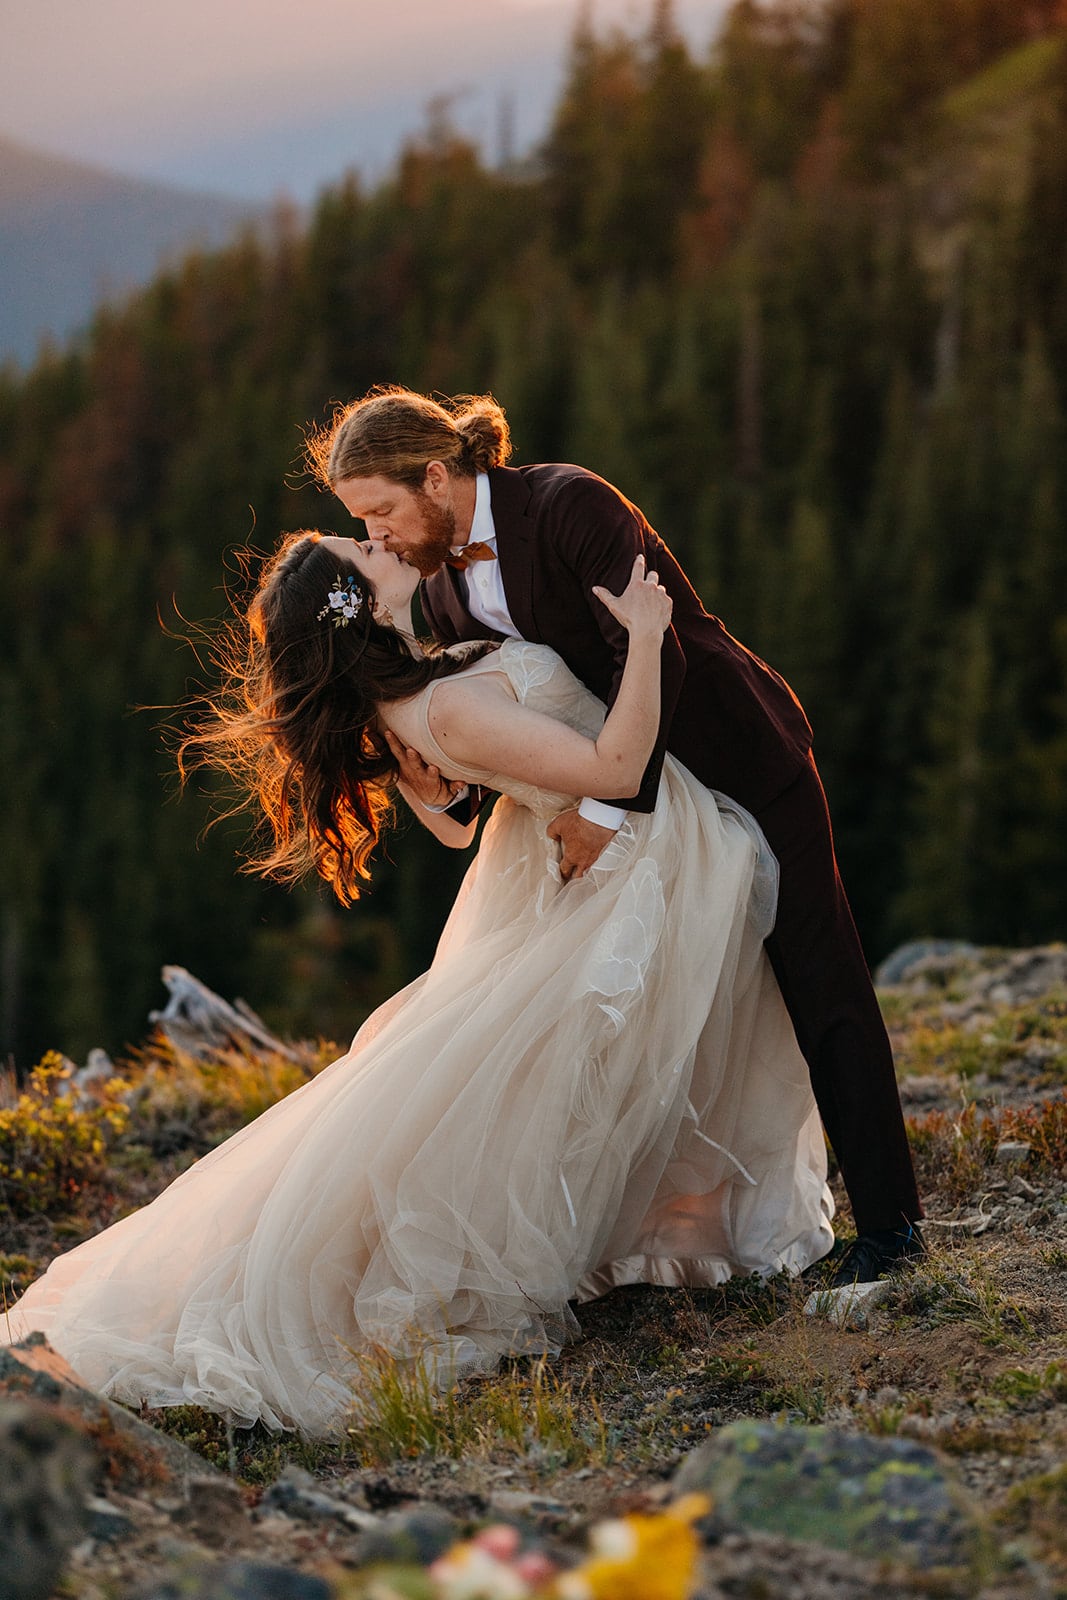 A couple shares a dip kiss in the red glowing sunset light on the mountain.